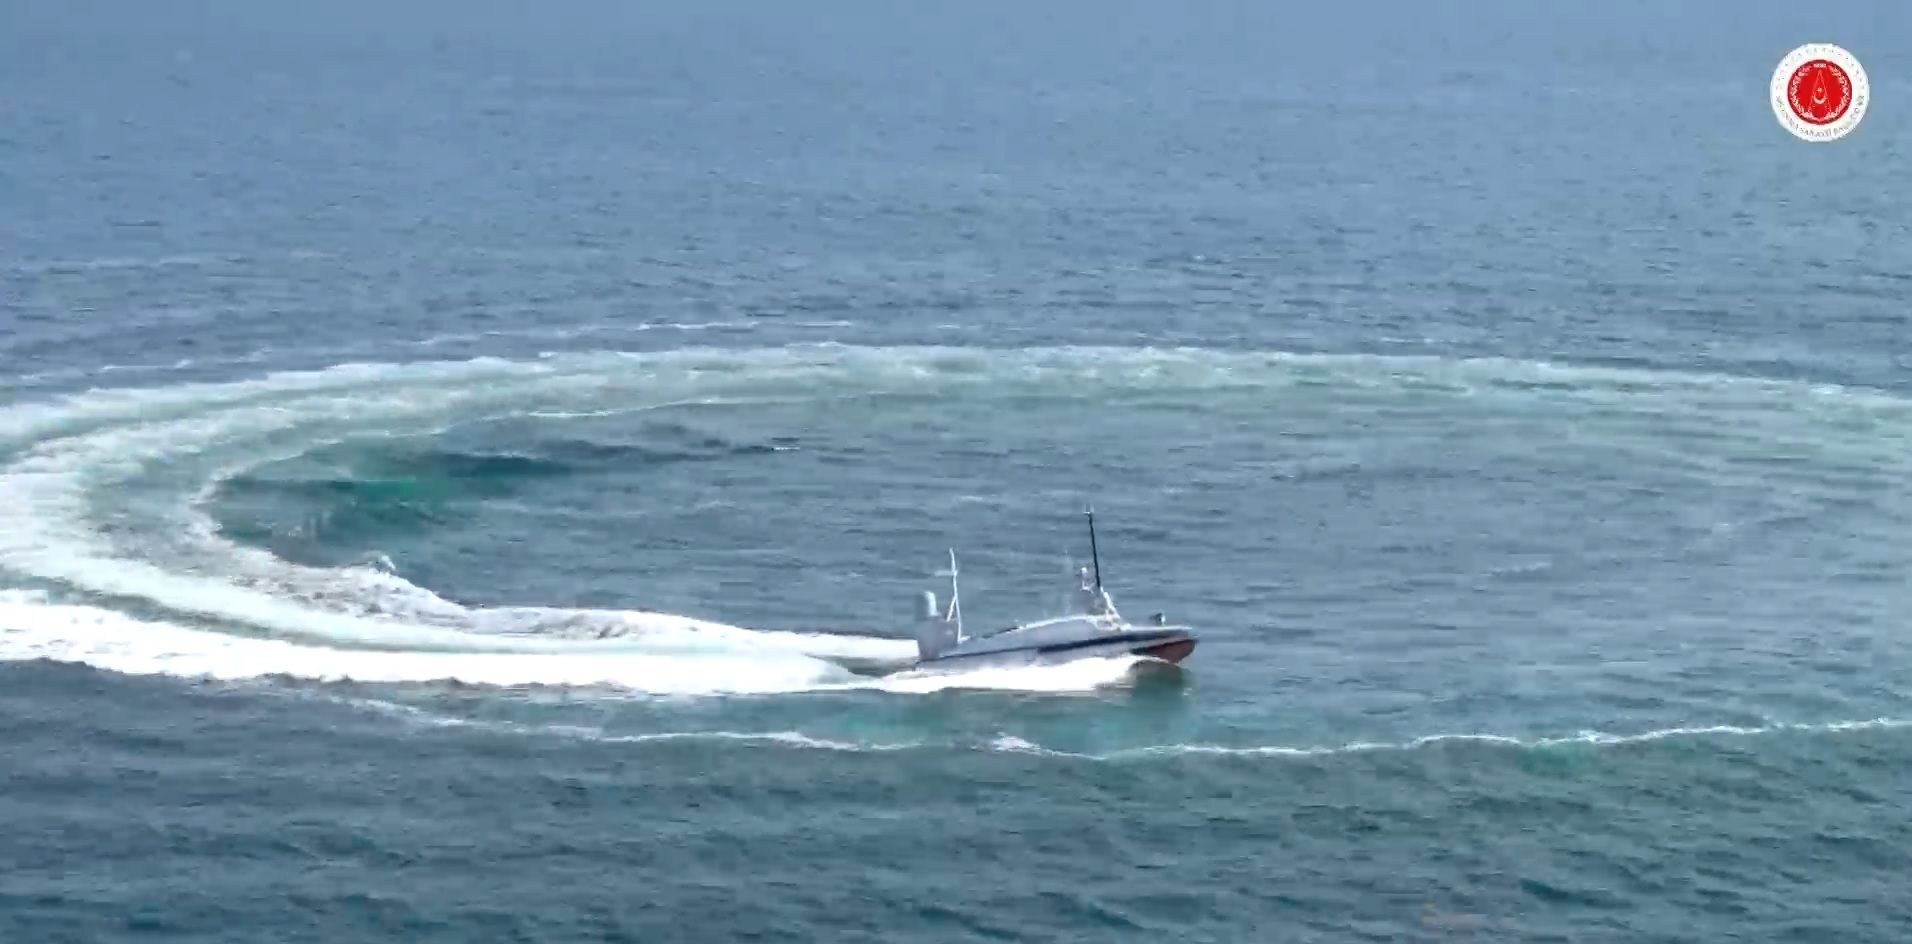 Turkish EW capable unmanned vessel Marlin on the trials